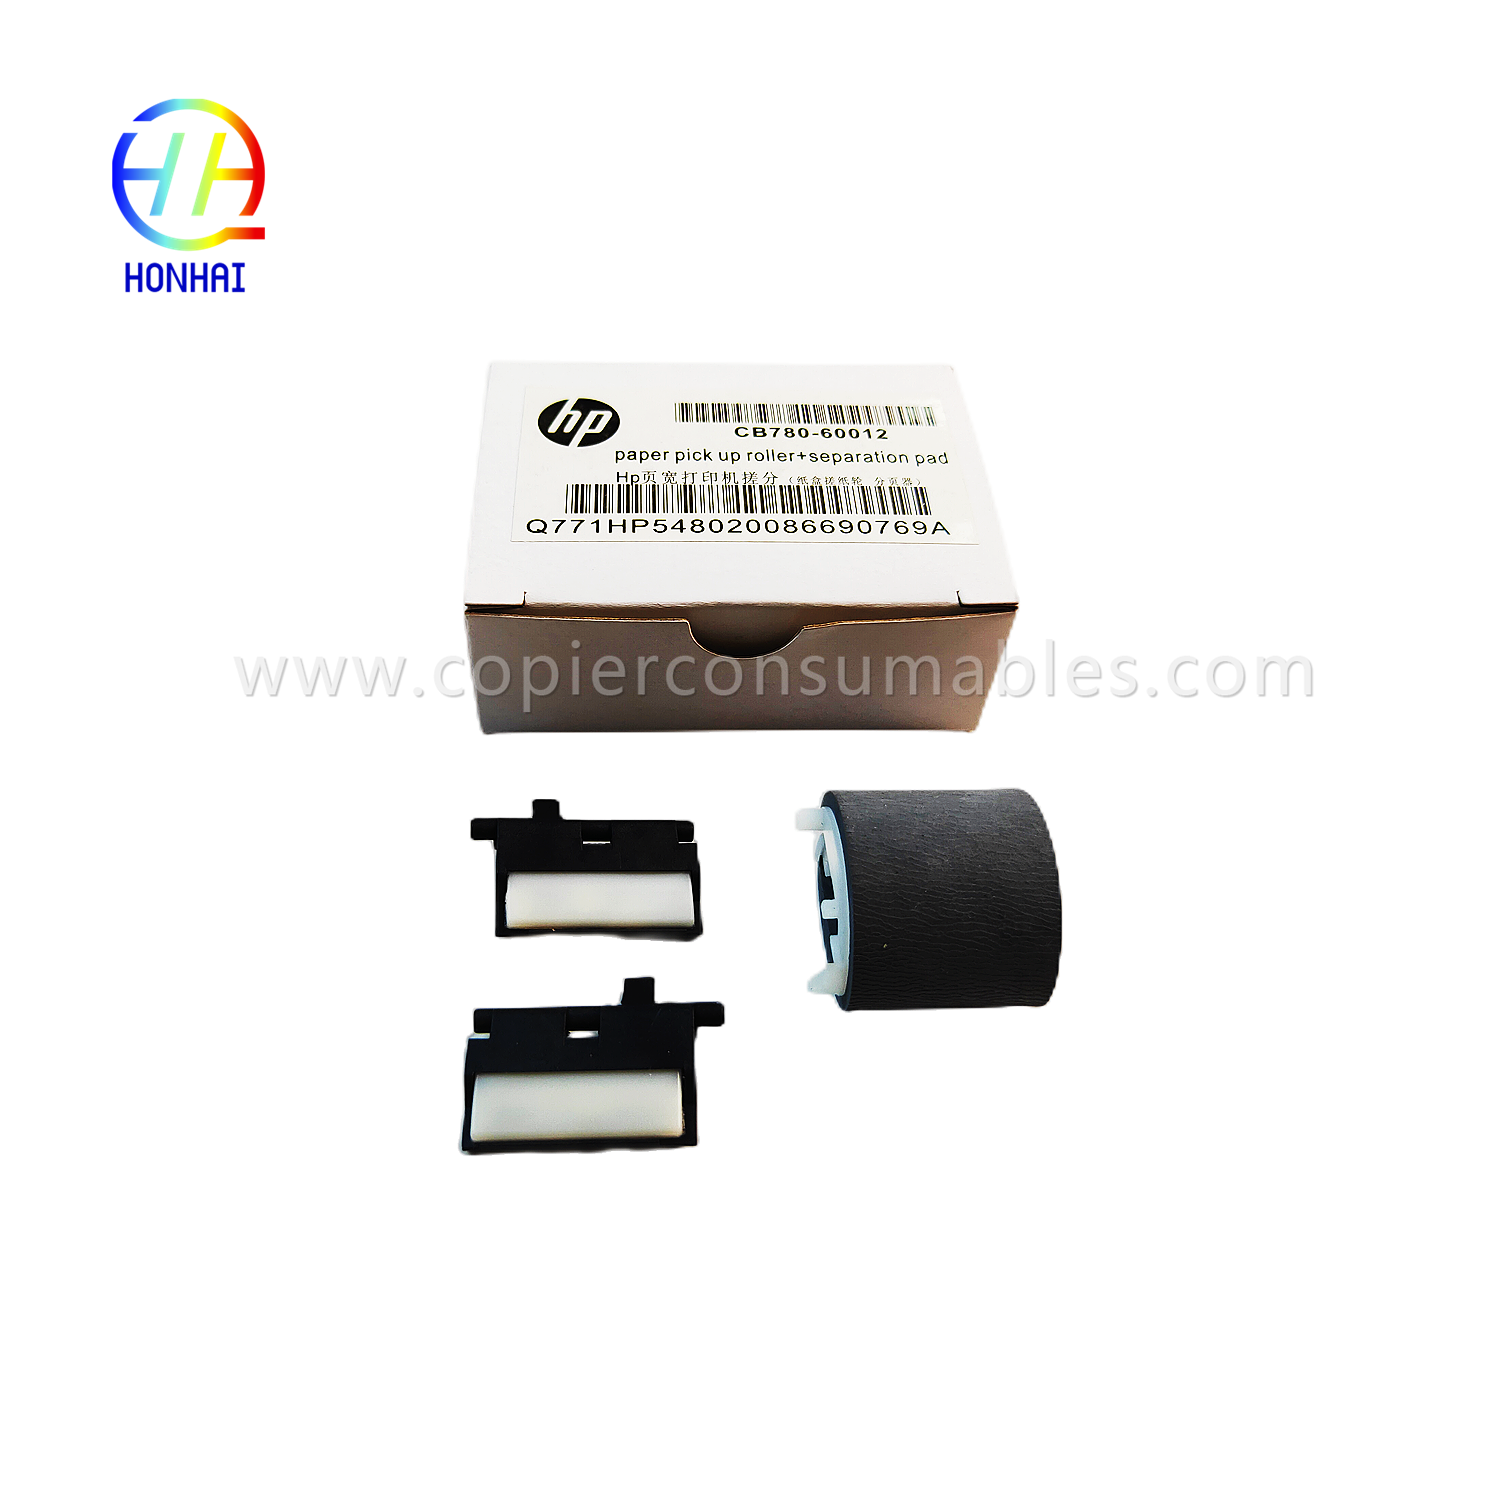 https://www.copierconsumables.com/paper-pickup-roller-separates-pad%ef%bc%88set%ef%bc%89for-hp-pagewide-x585z-x451dn-x476dn-x551dw-x576dw-556dn-56 452dn-477dn-552-577z-cb780-60012-product/